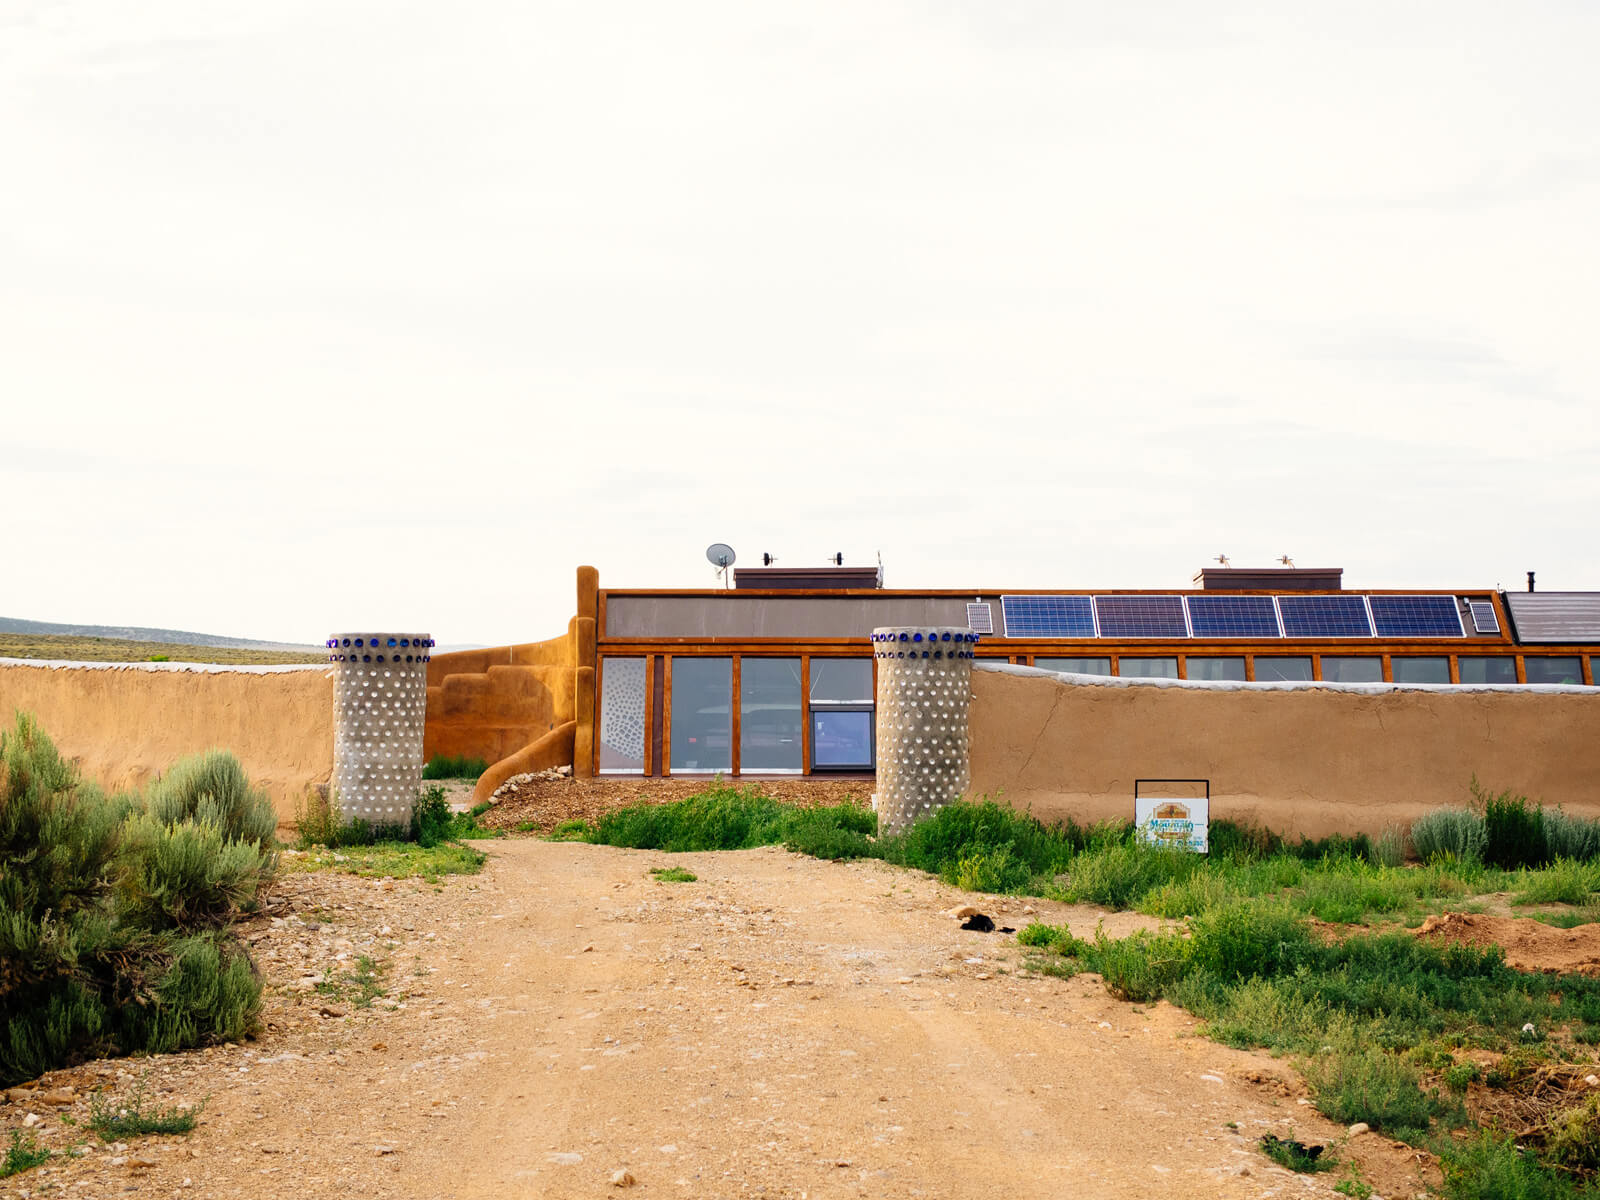 The Waybee Earthship in Taos, New Mexico